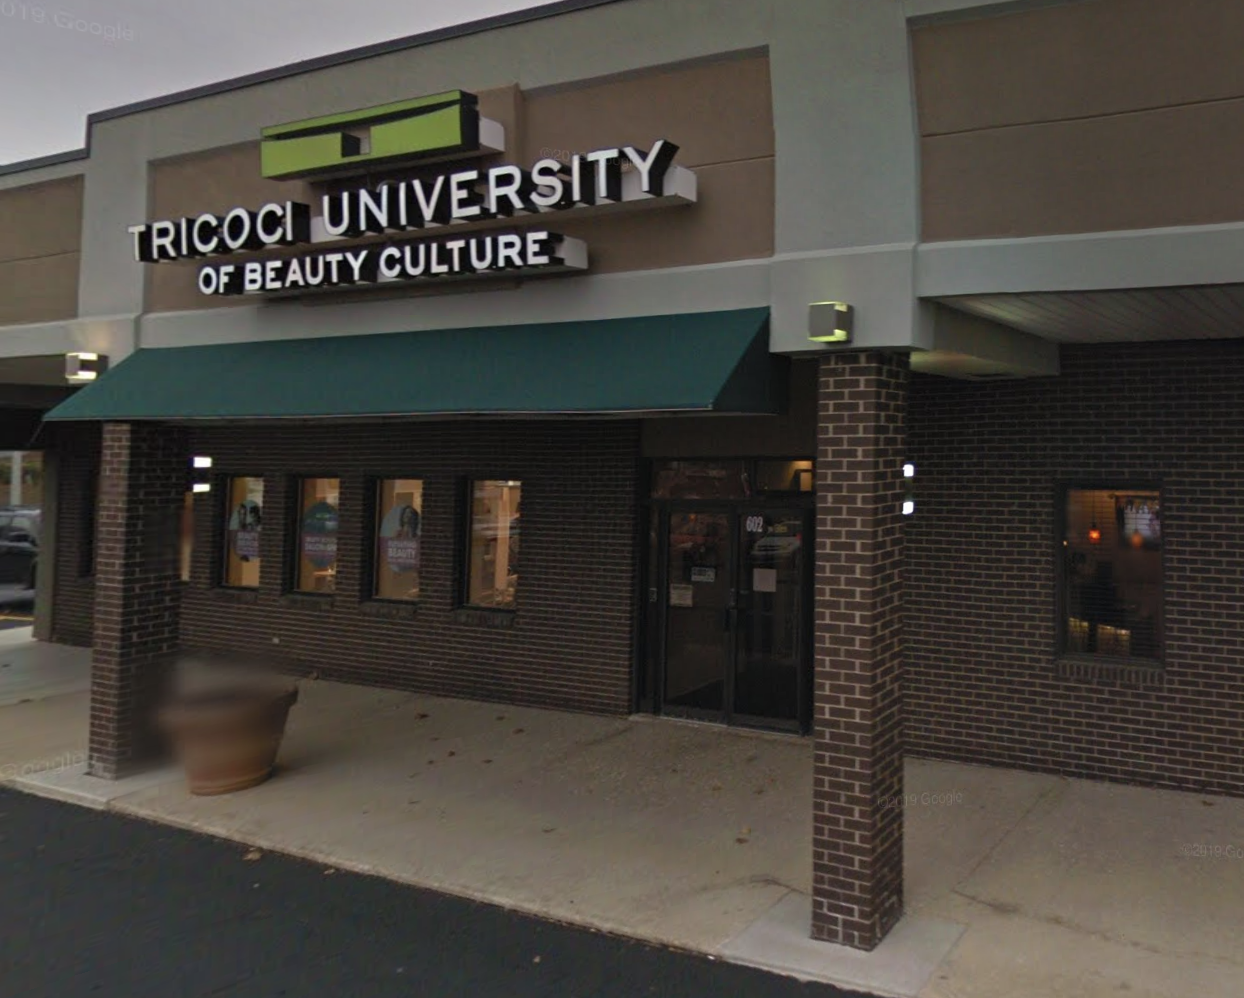 Peoria campus of Tricoci University of Beauty Culture providing Waxing services